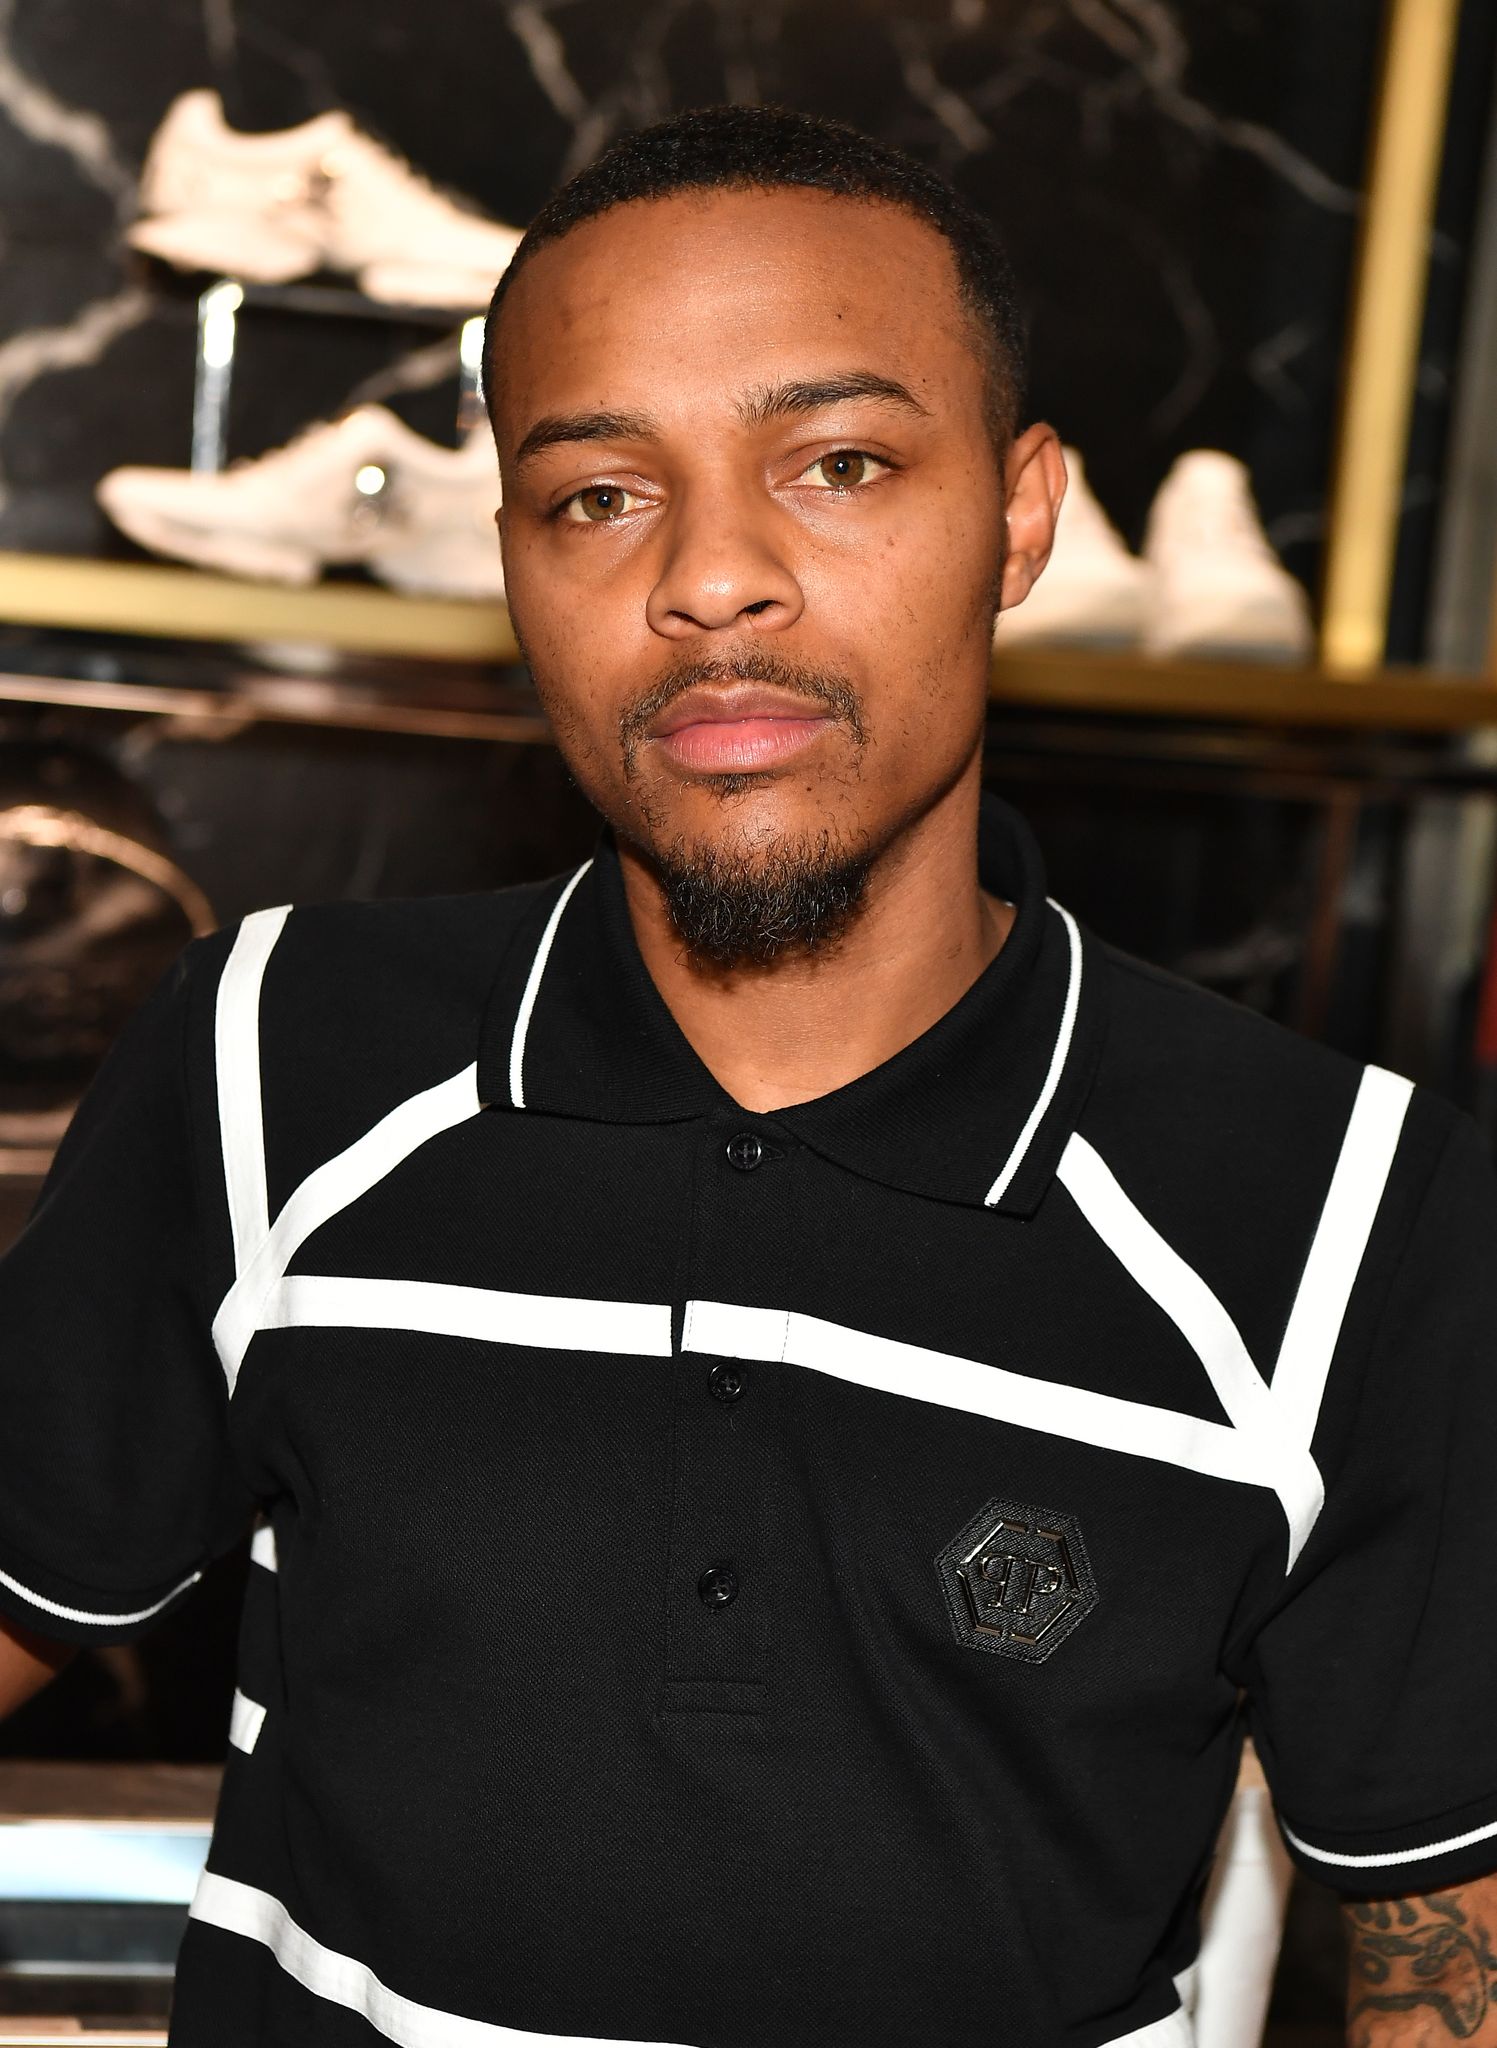 Bow Wow at his "Rolling Out" Reveal Party on July 12, 2018 in Atlanta. | Photo: Getty Images